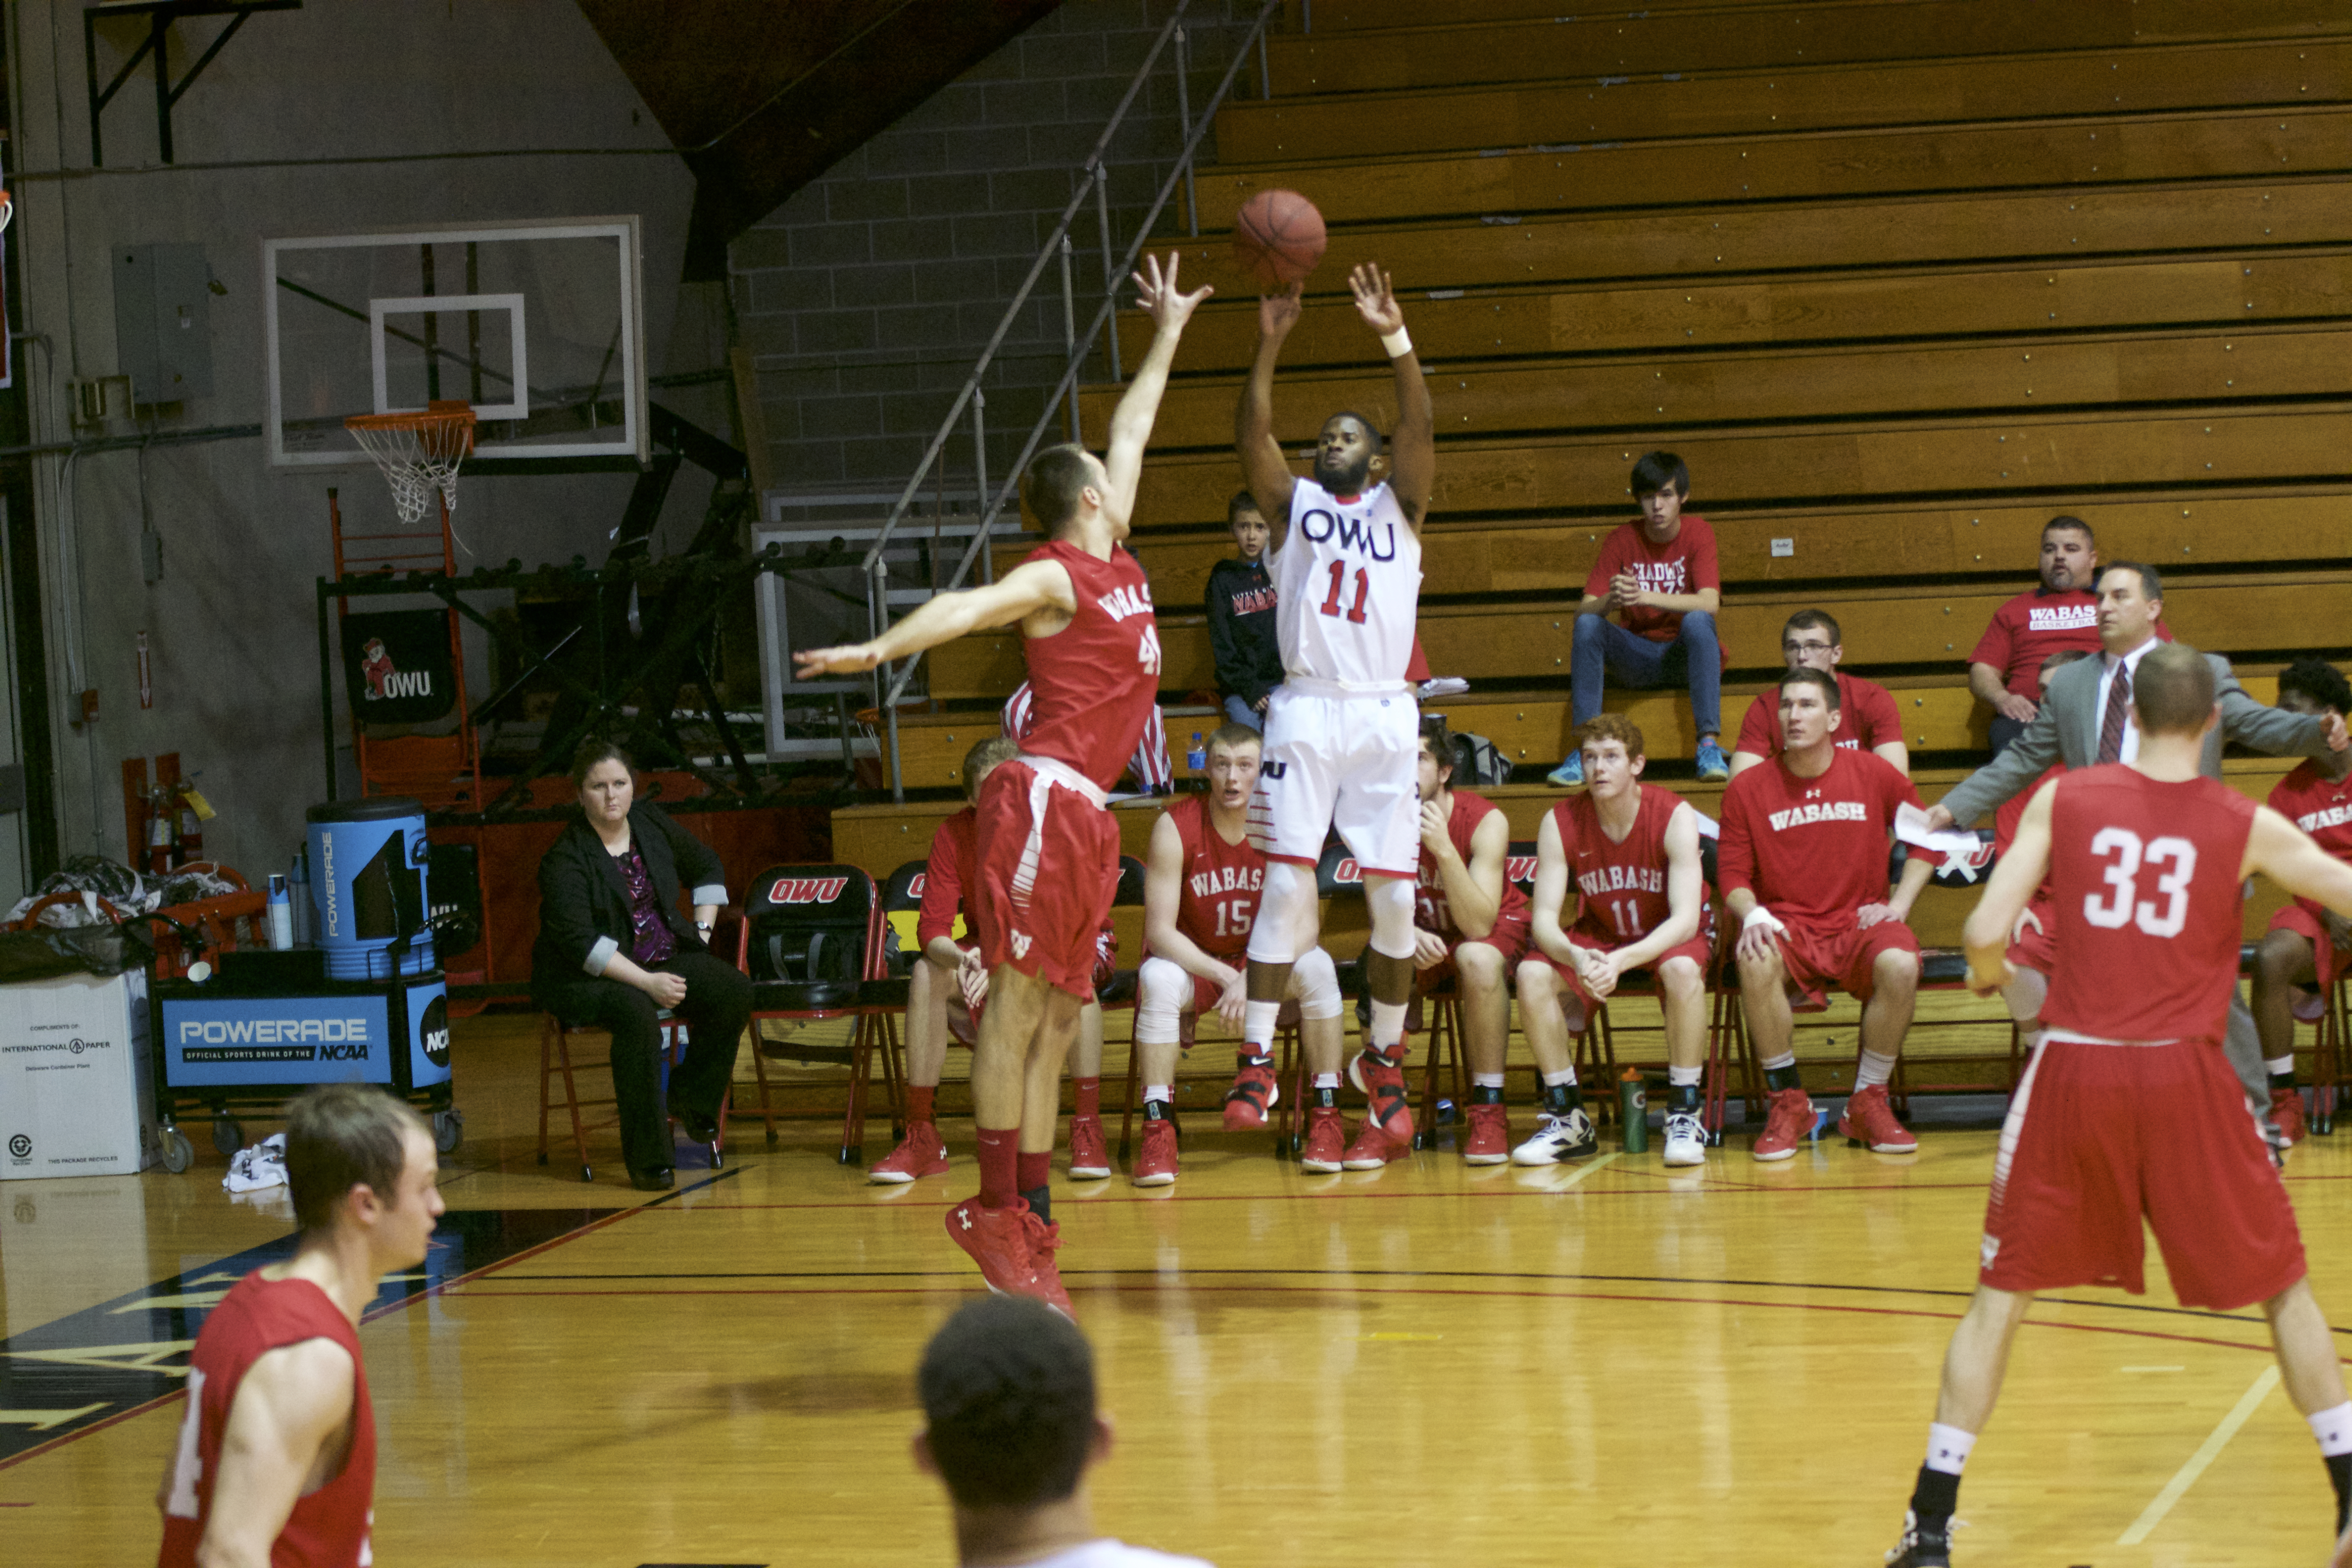 Men’s basketball shaping to be ‘one of the best in OWU history’